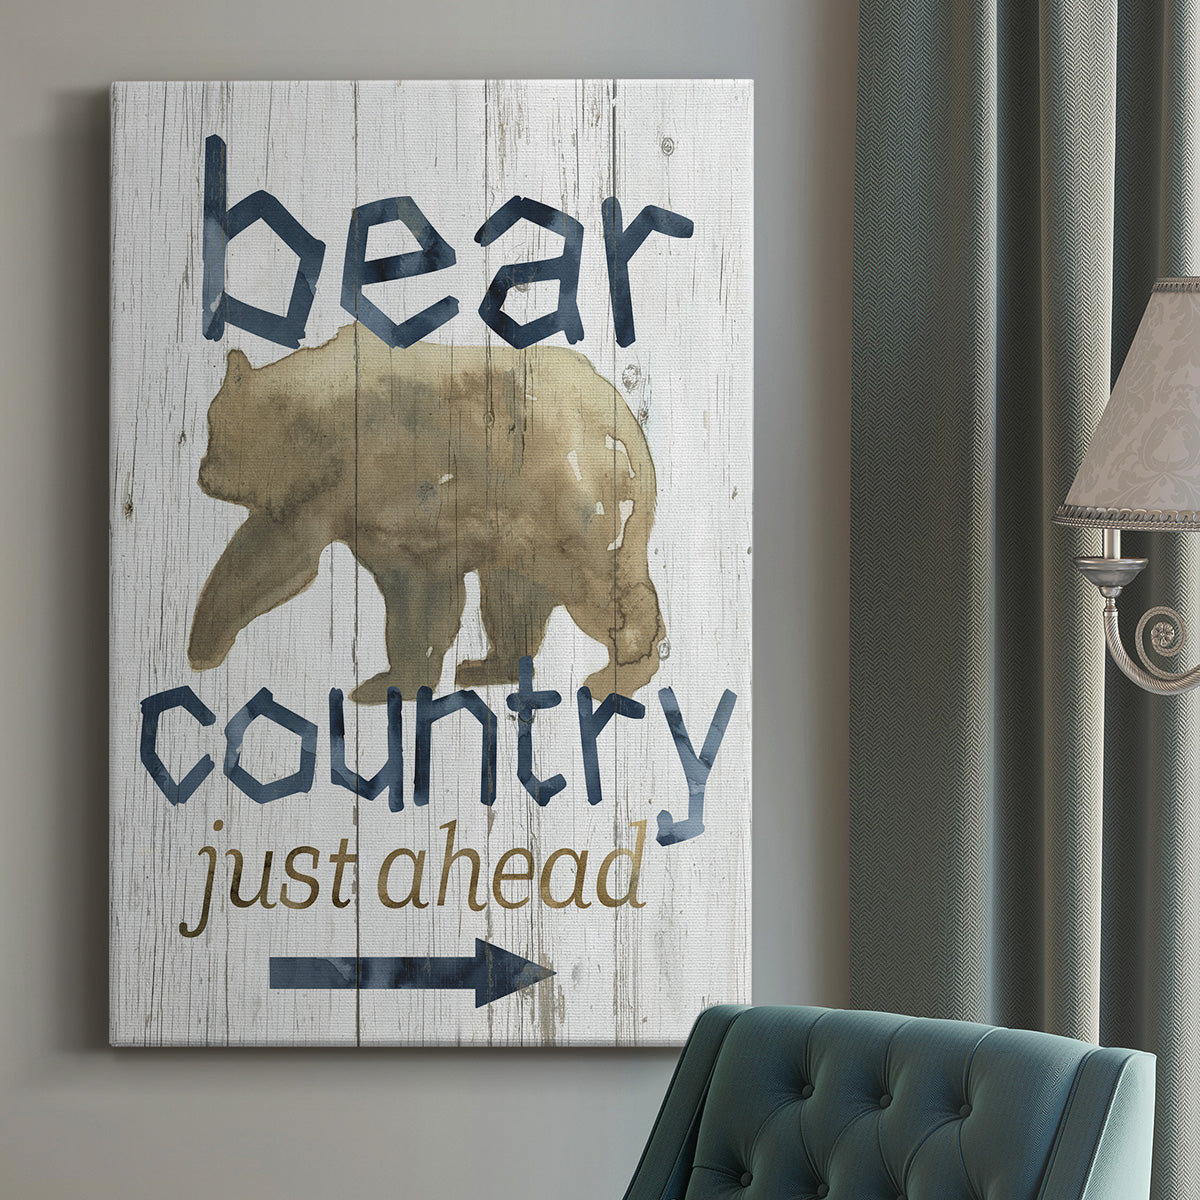 Bear Country Premium Gallery Wrapped Canvas - Ready to Hang